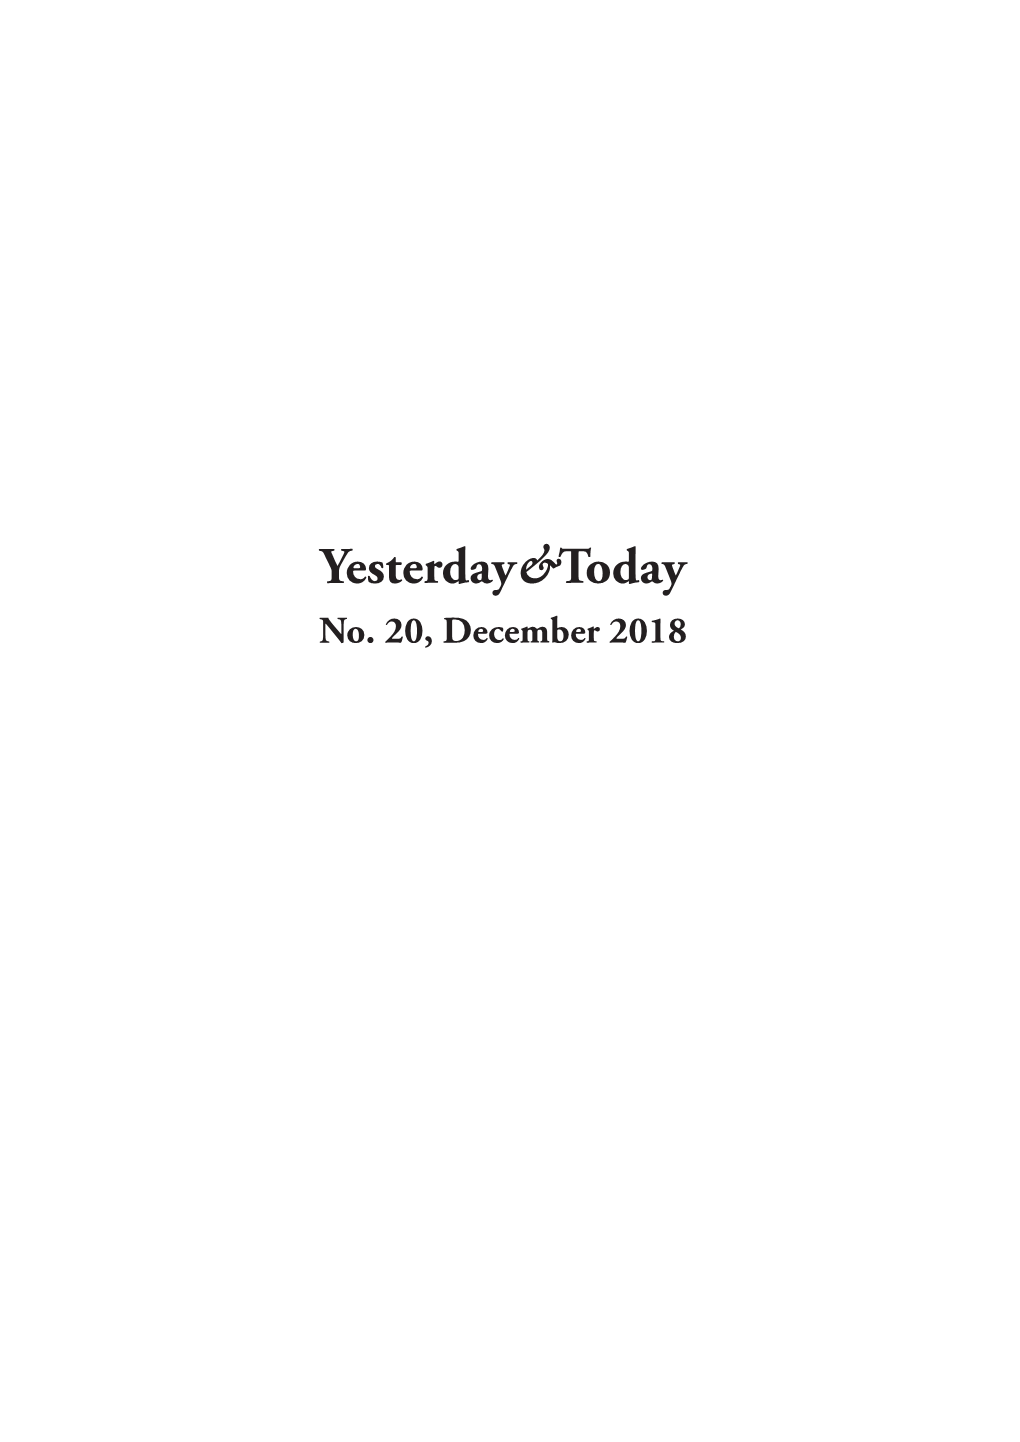 Yesterday & Today, No 20, December 2018